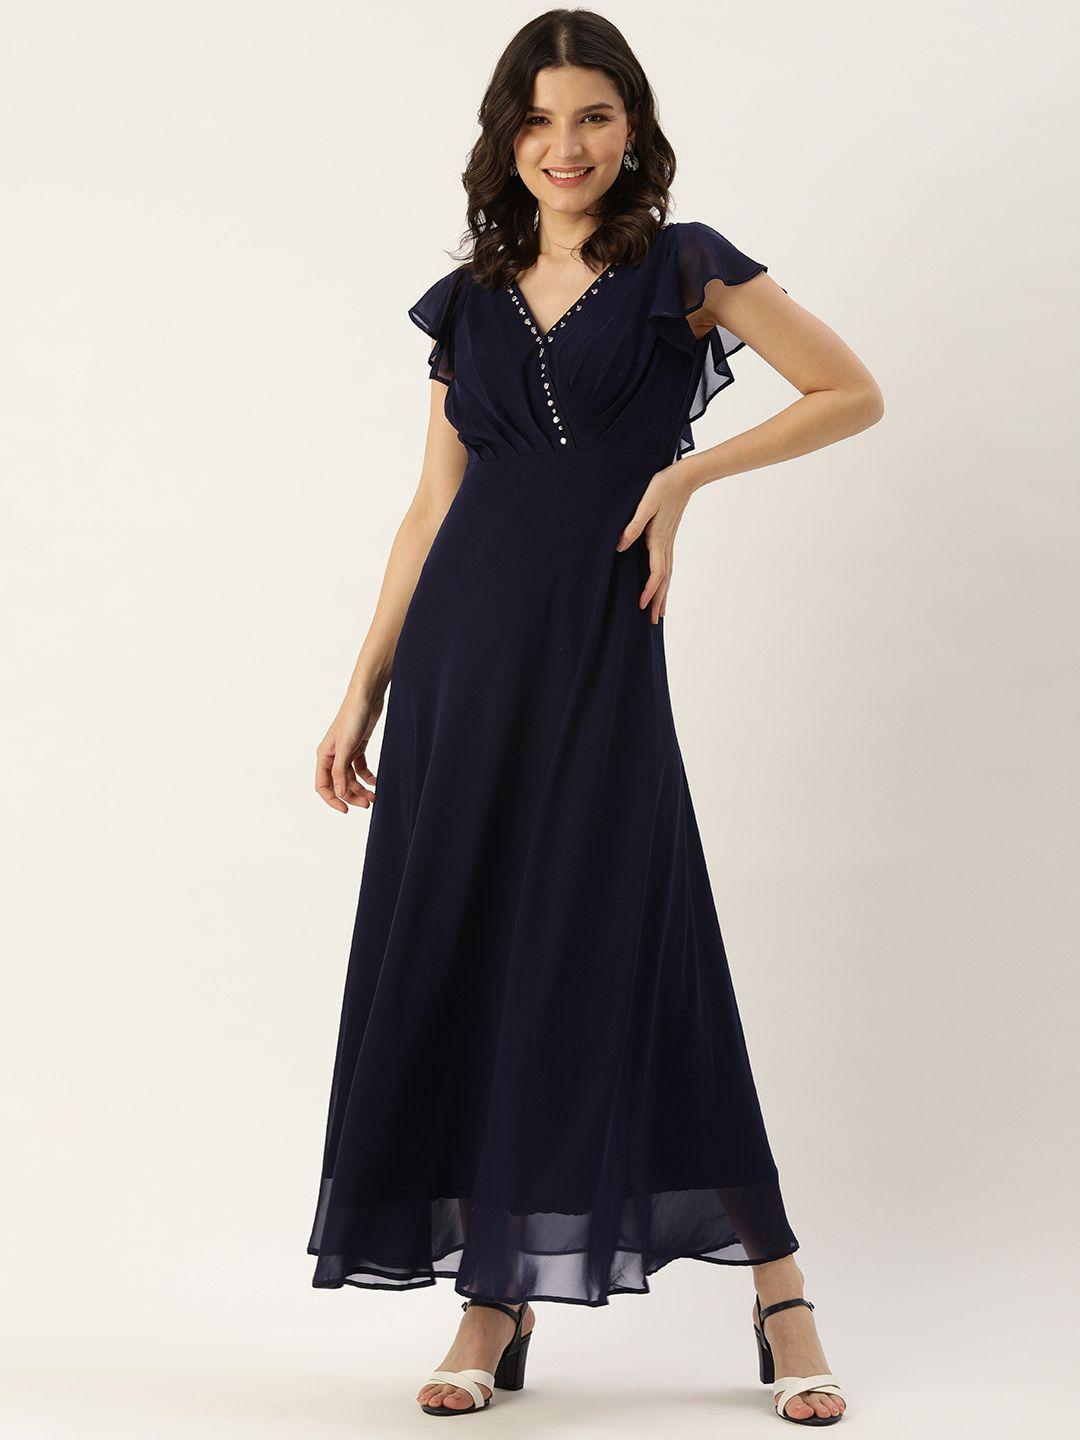 meloso navy blue georgette a-line maxi dress with ruffle detail